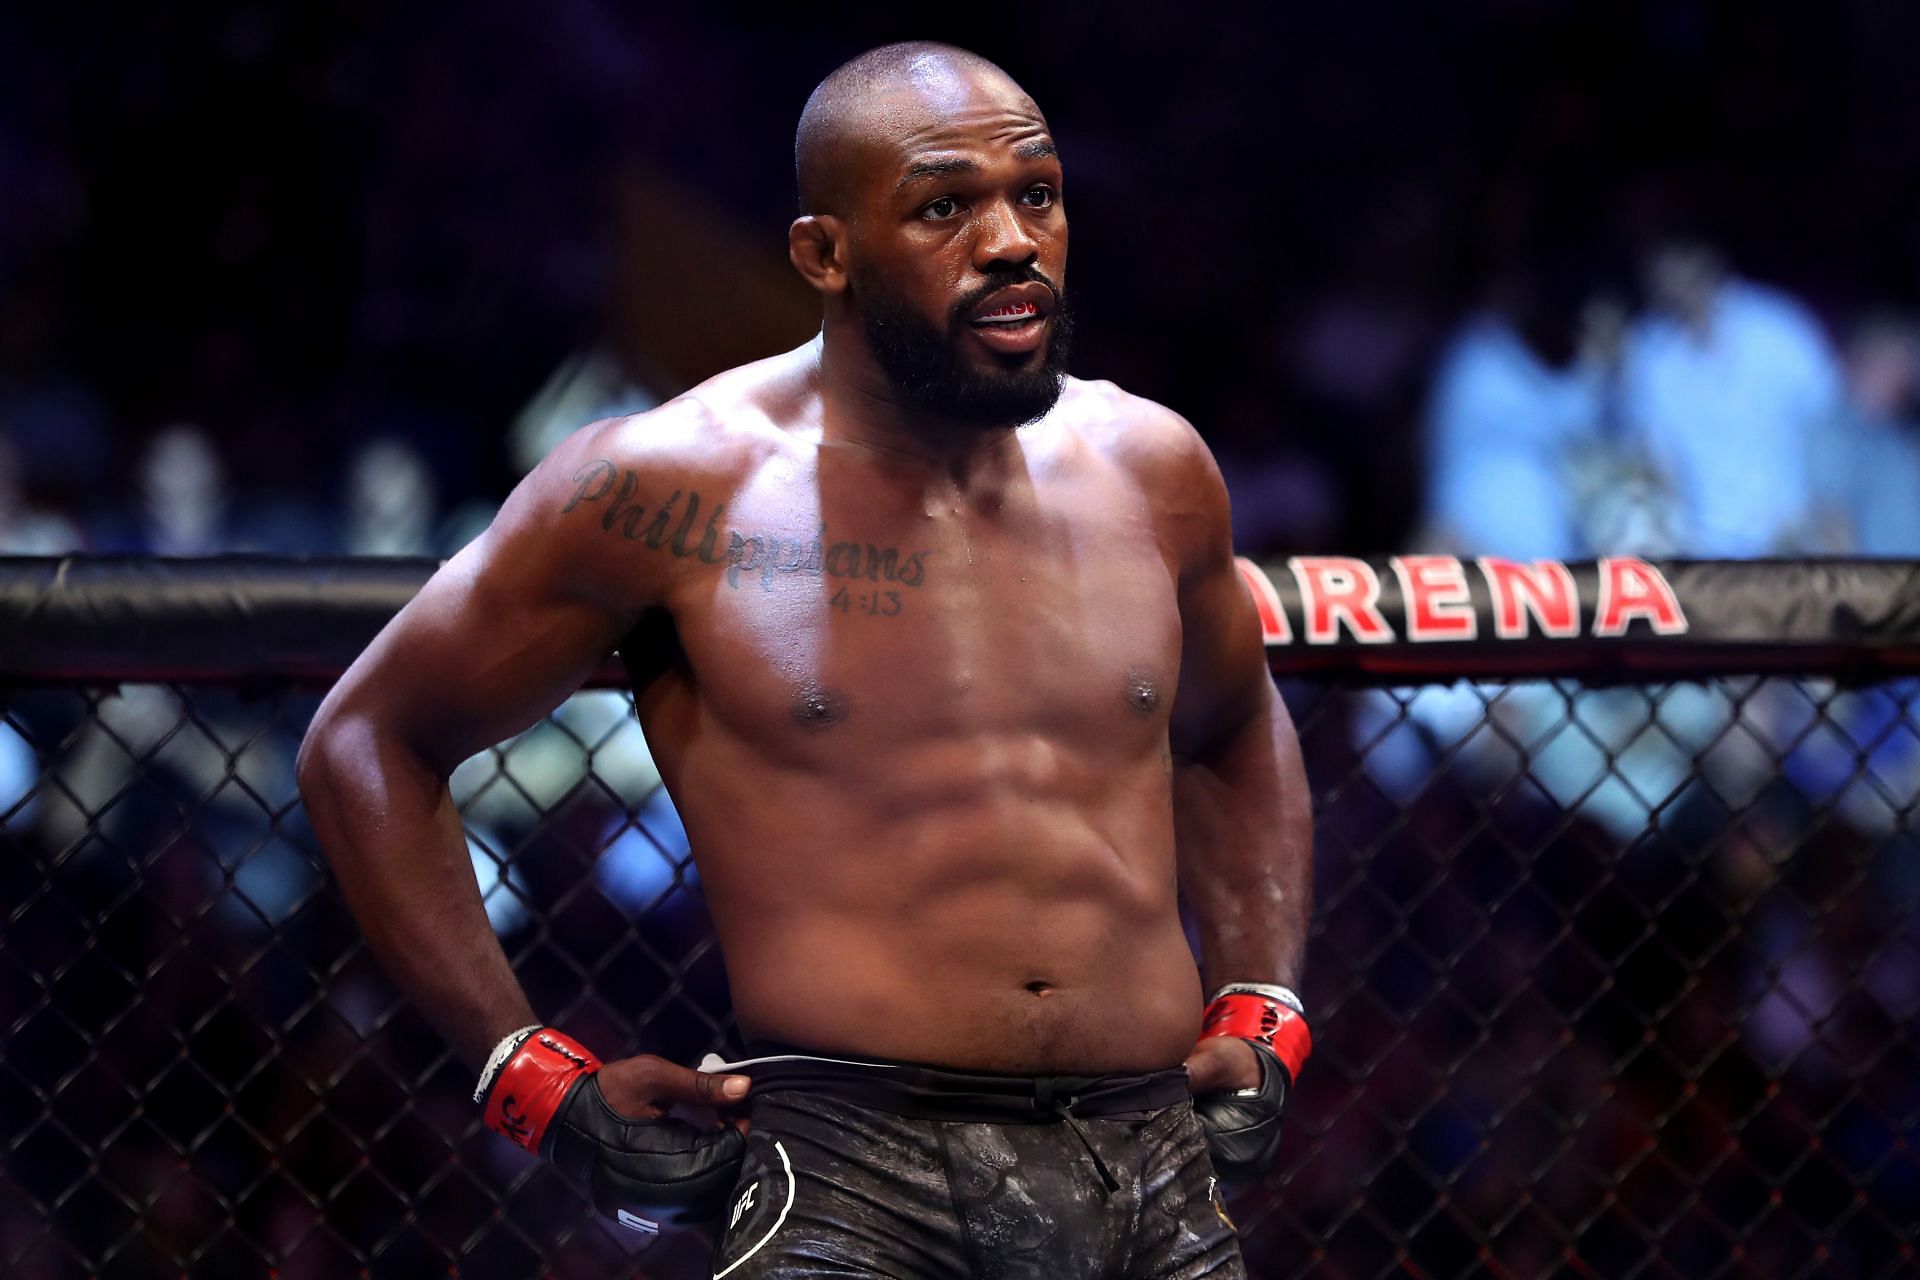 Jon Jones quickly became a heel in the eyes of the fans during his early reign as light-heavyweight champion